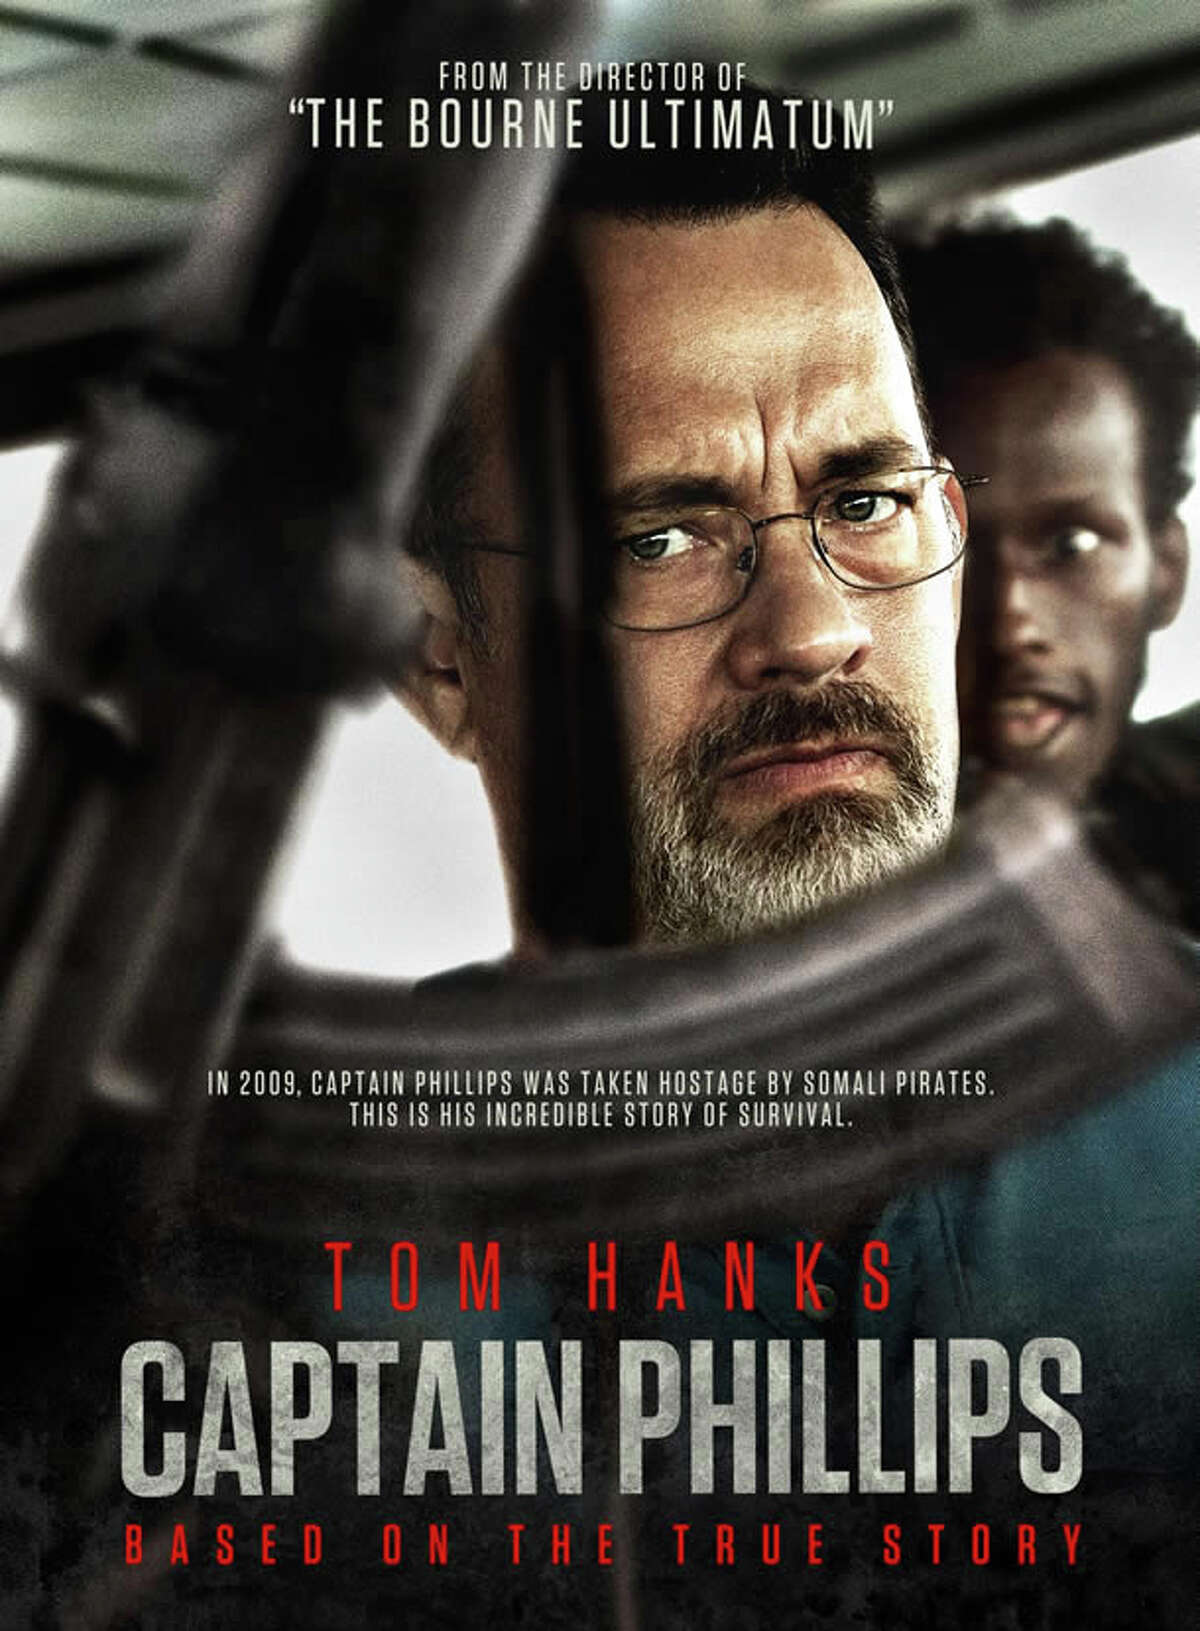 "Captain Phillips," starring Tom Hanks, tells story of a cargo ship captain taken hostage by Somali pirates. While the film did get a nod in the Best Picture category, Hanks was not nominated for Best Actor. It was a surprise since he earned nominations from the Screen Actors Guild, Golden Globes and BAFTA Awards.